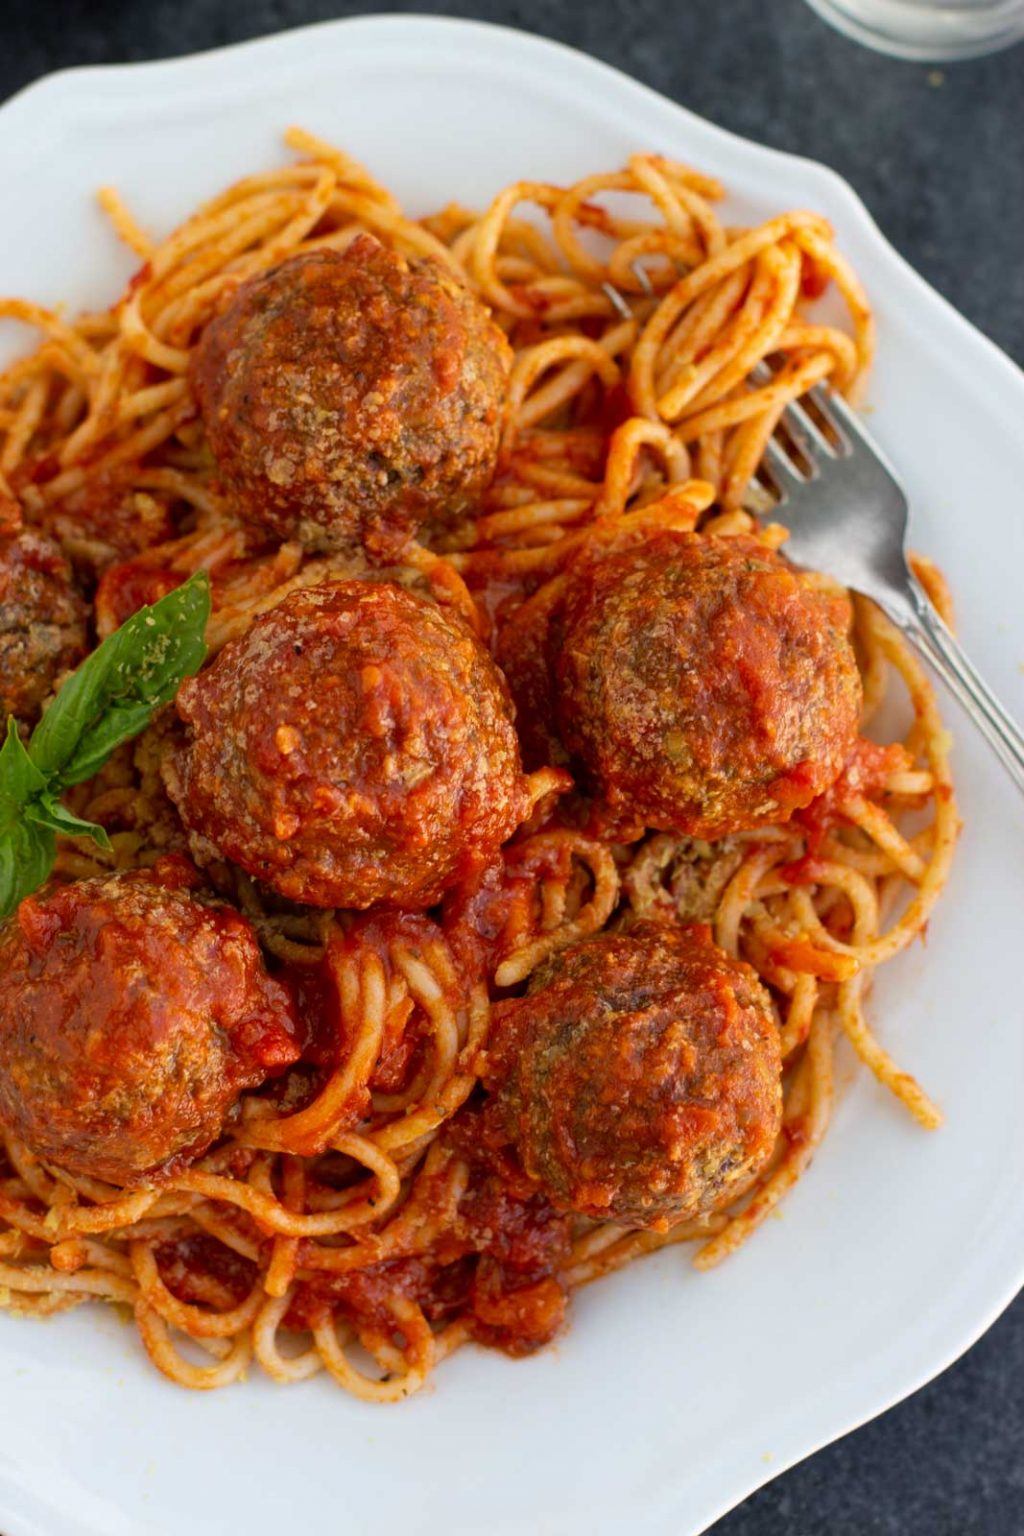 A white plate filled with vegan meatballs and spaghetti on a dark background.